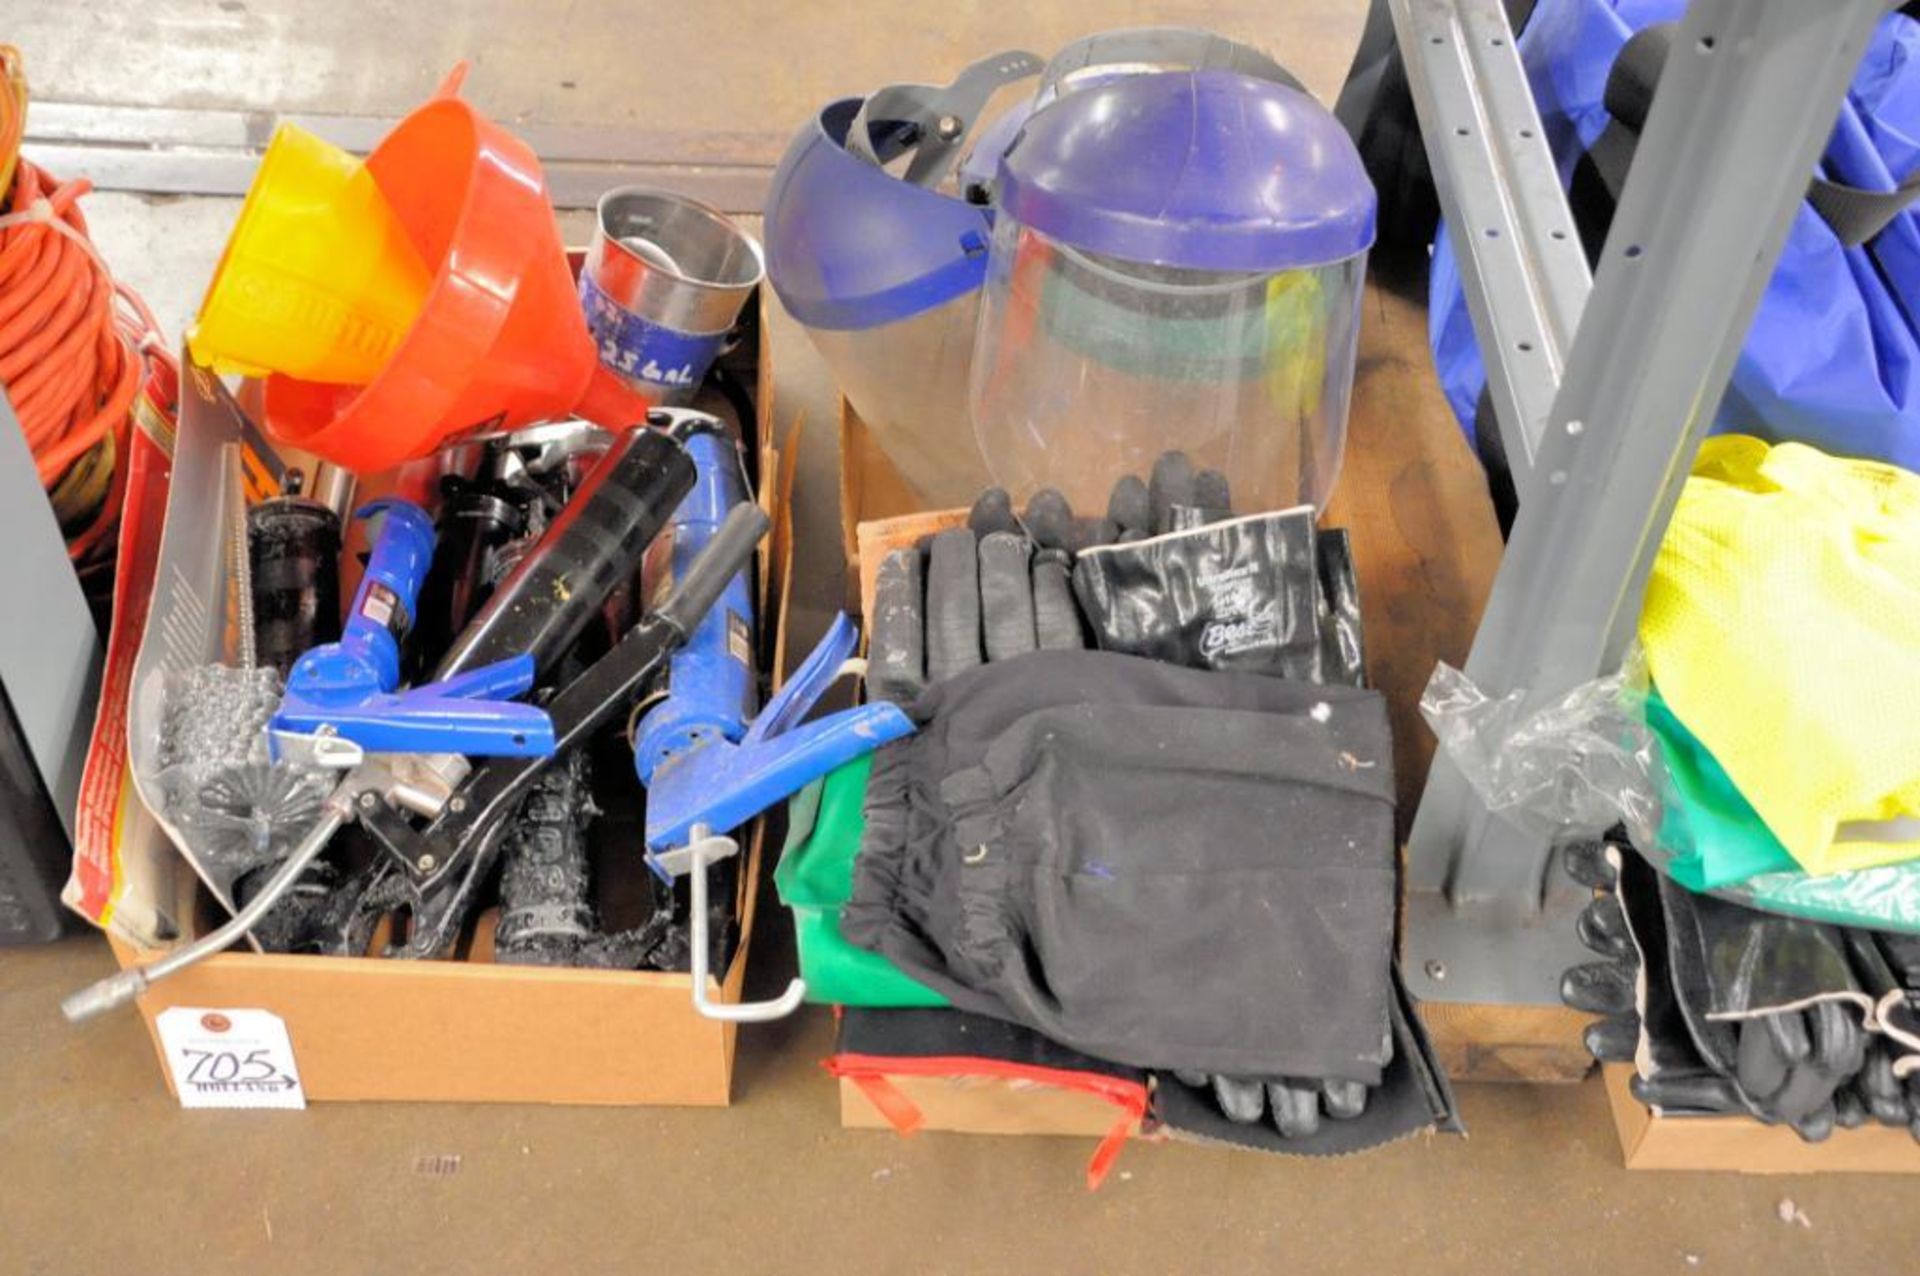 Lot - Safety Gear, Gloves, Safety Shields, Funnels, Hones, Caulk Guns and Grease Guns in (3) Boxes - Image 2 of 2